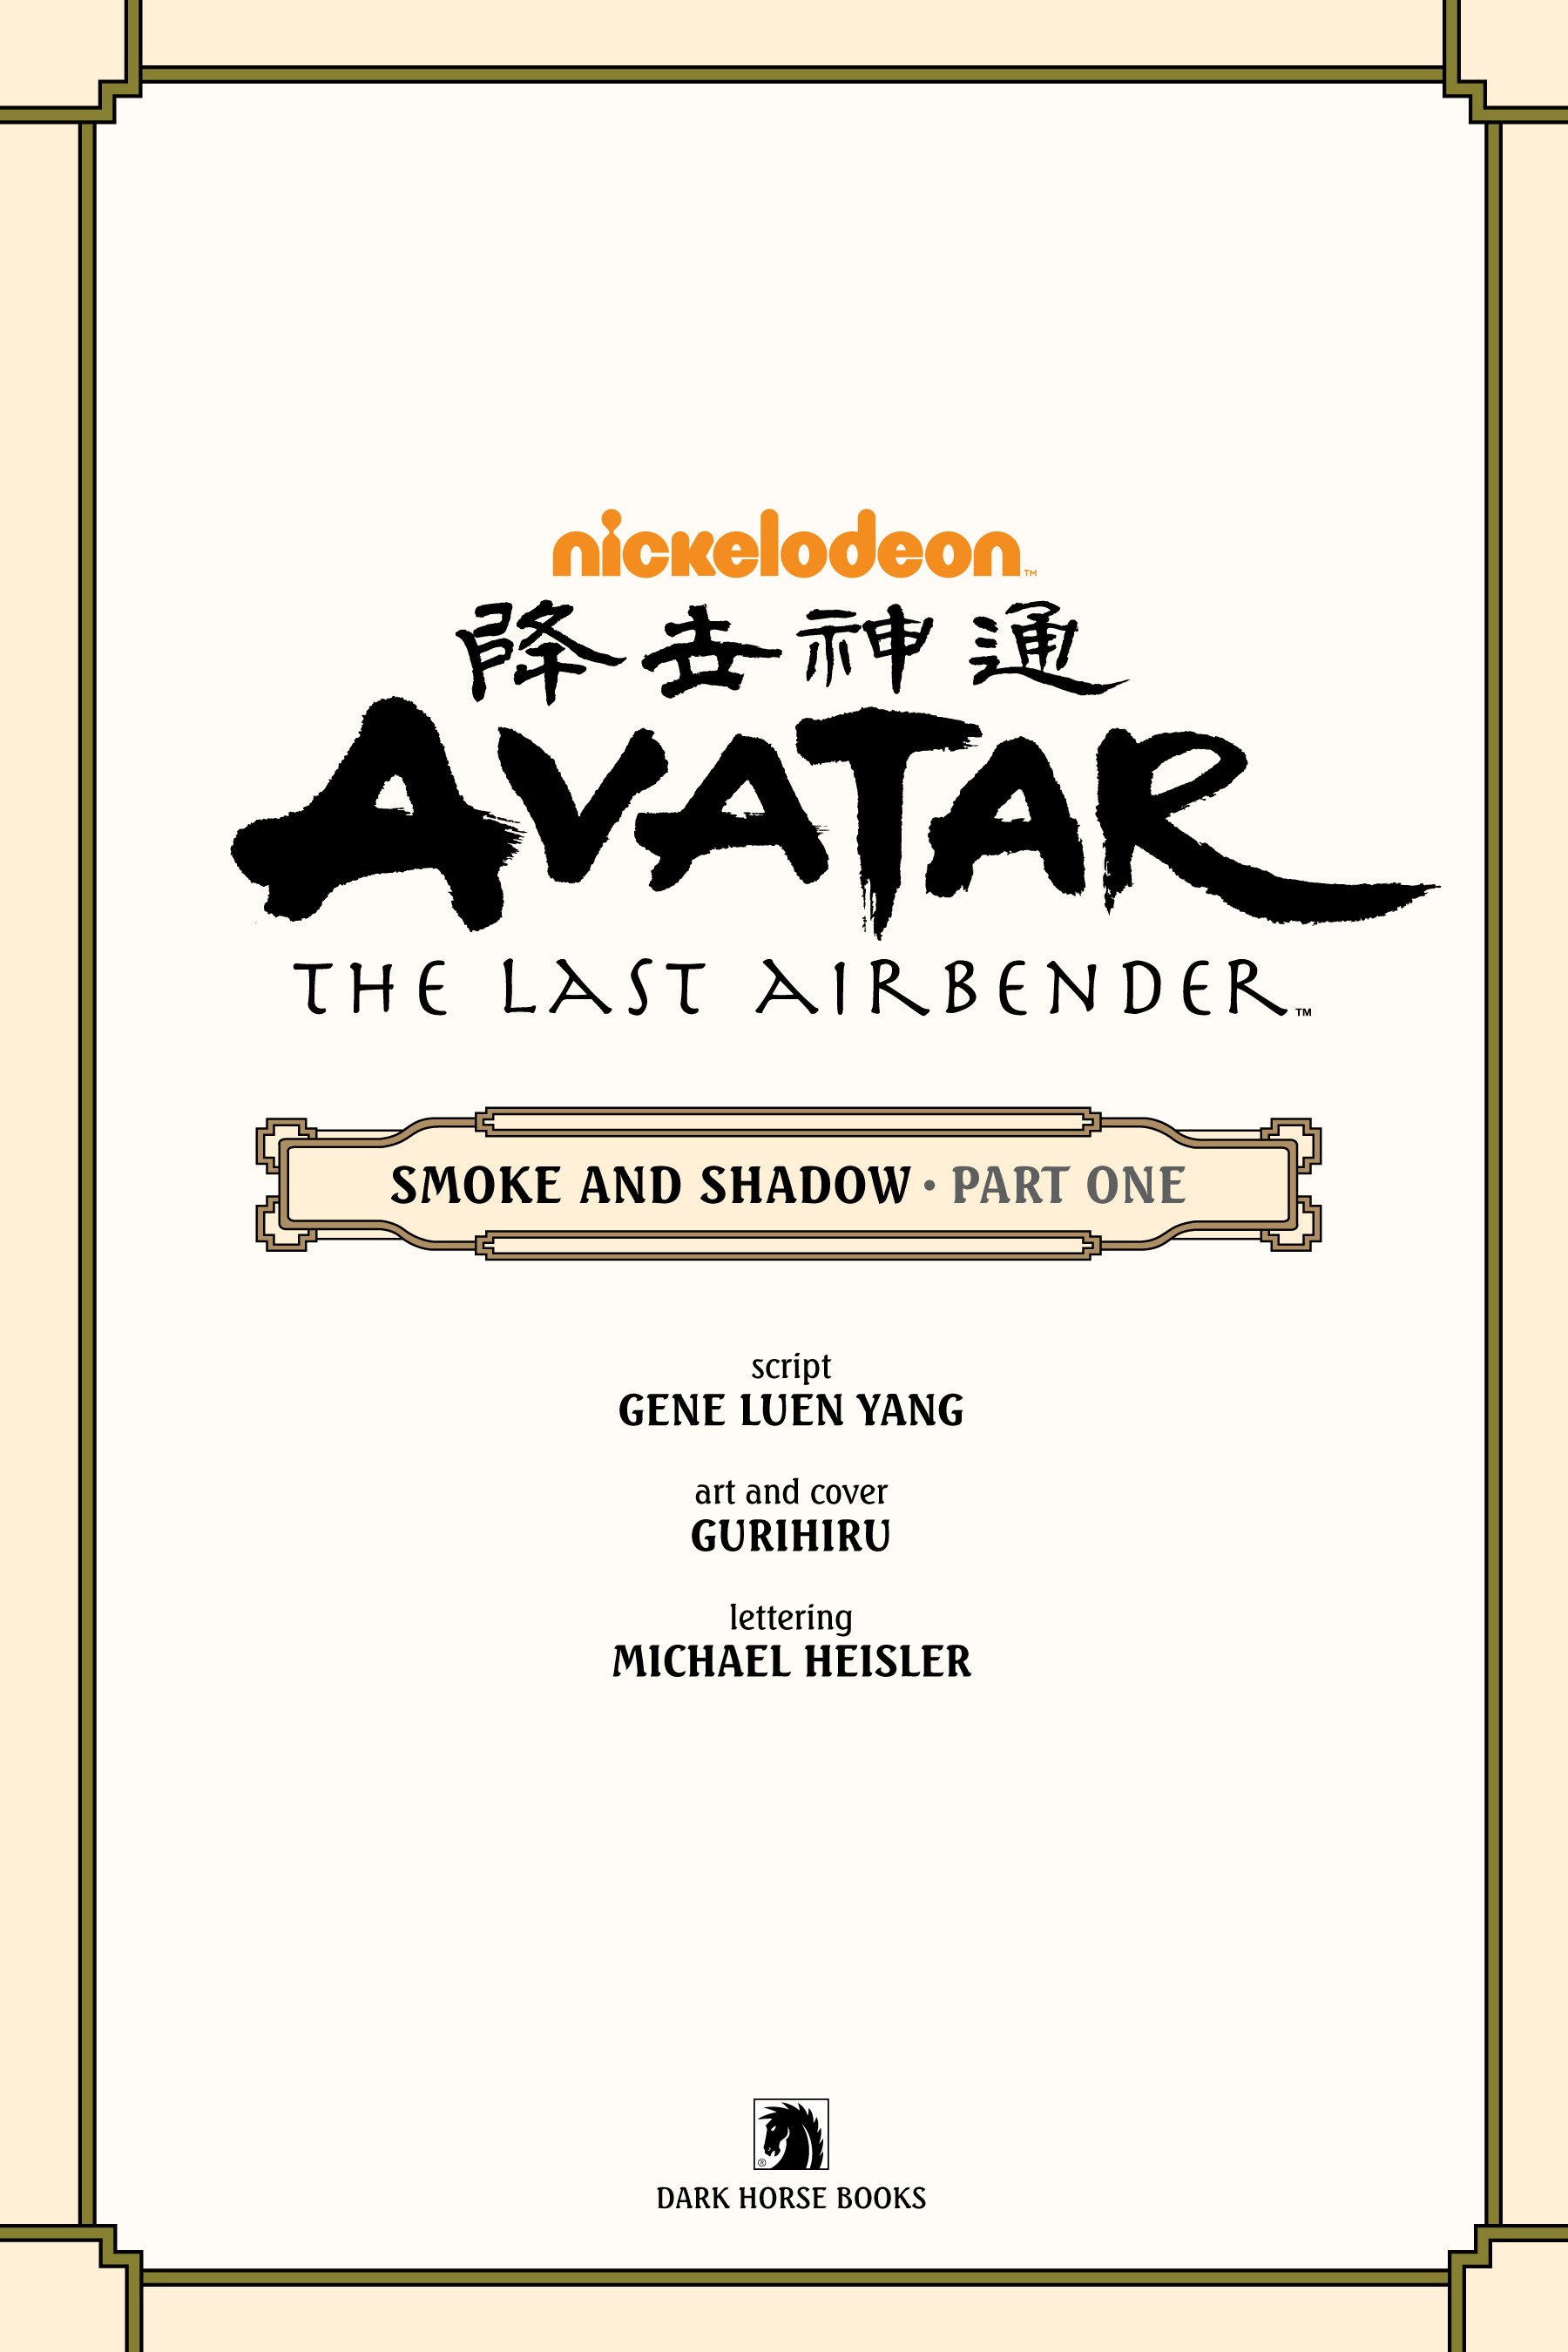 Read online Nickelodeon Avatar: The Last Airbender - Smoke and Shadow comic -  Issue # Part 1 - 5